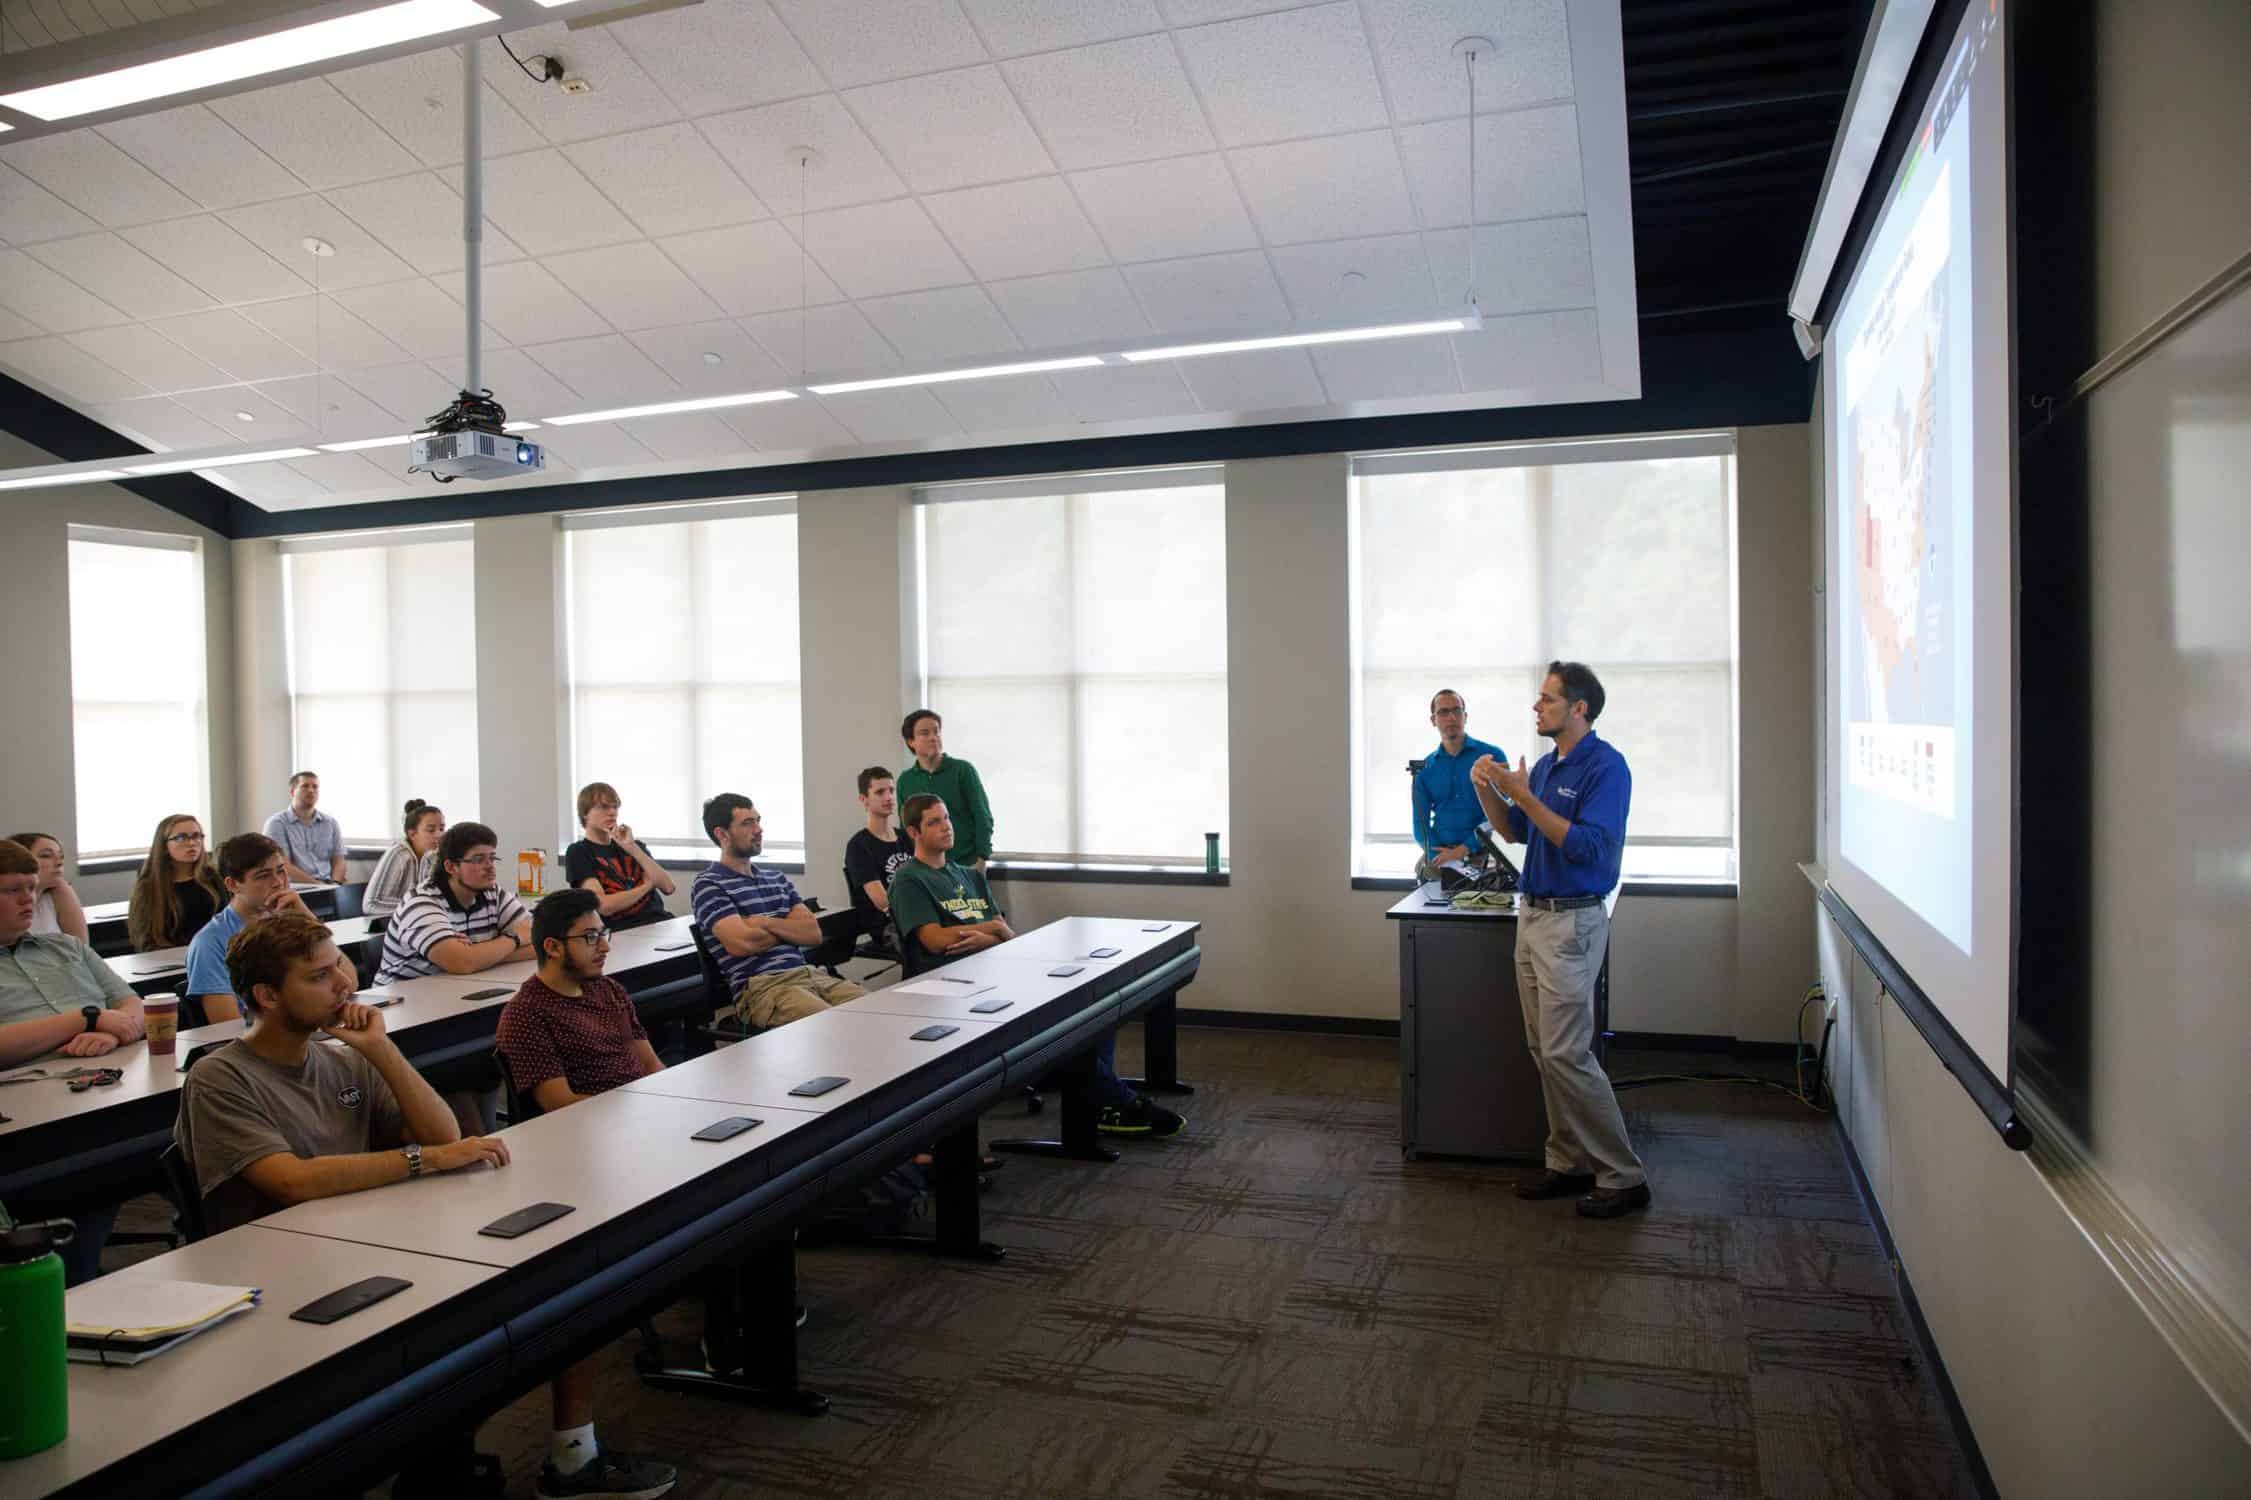 Professor speaks to class in front of a projector screen